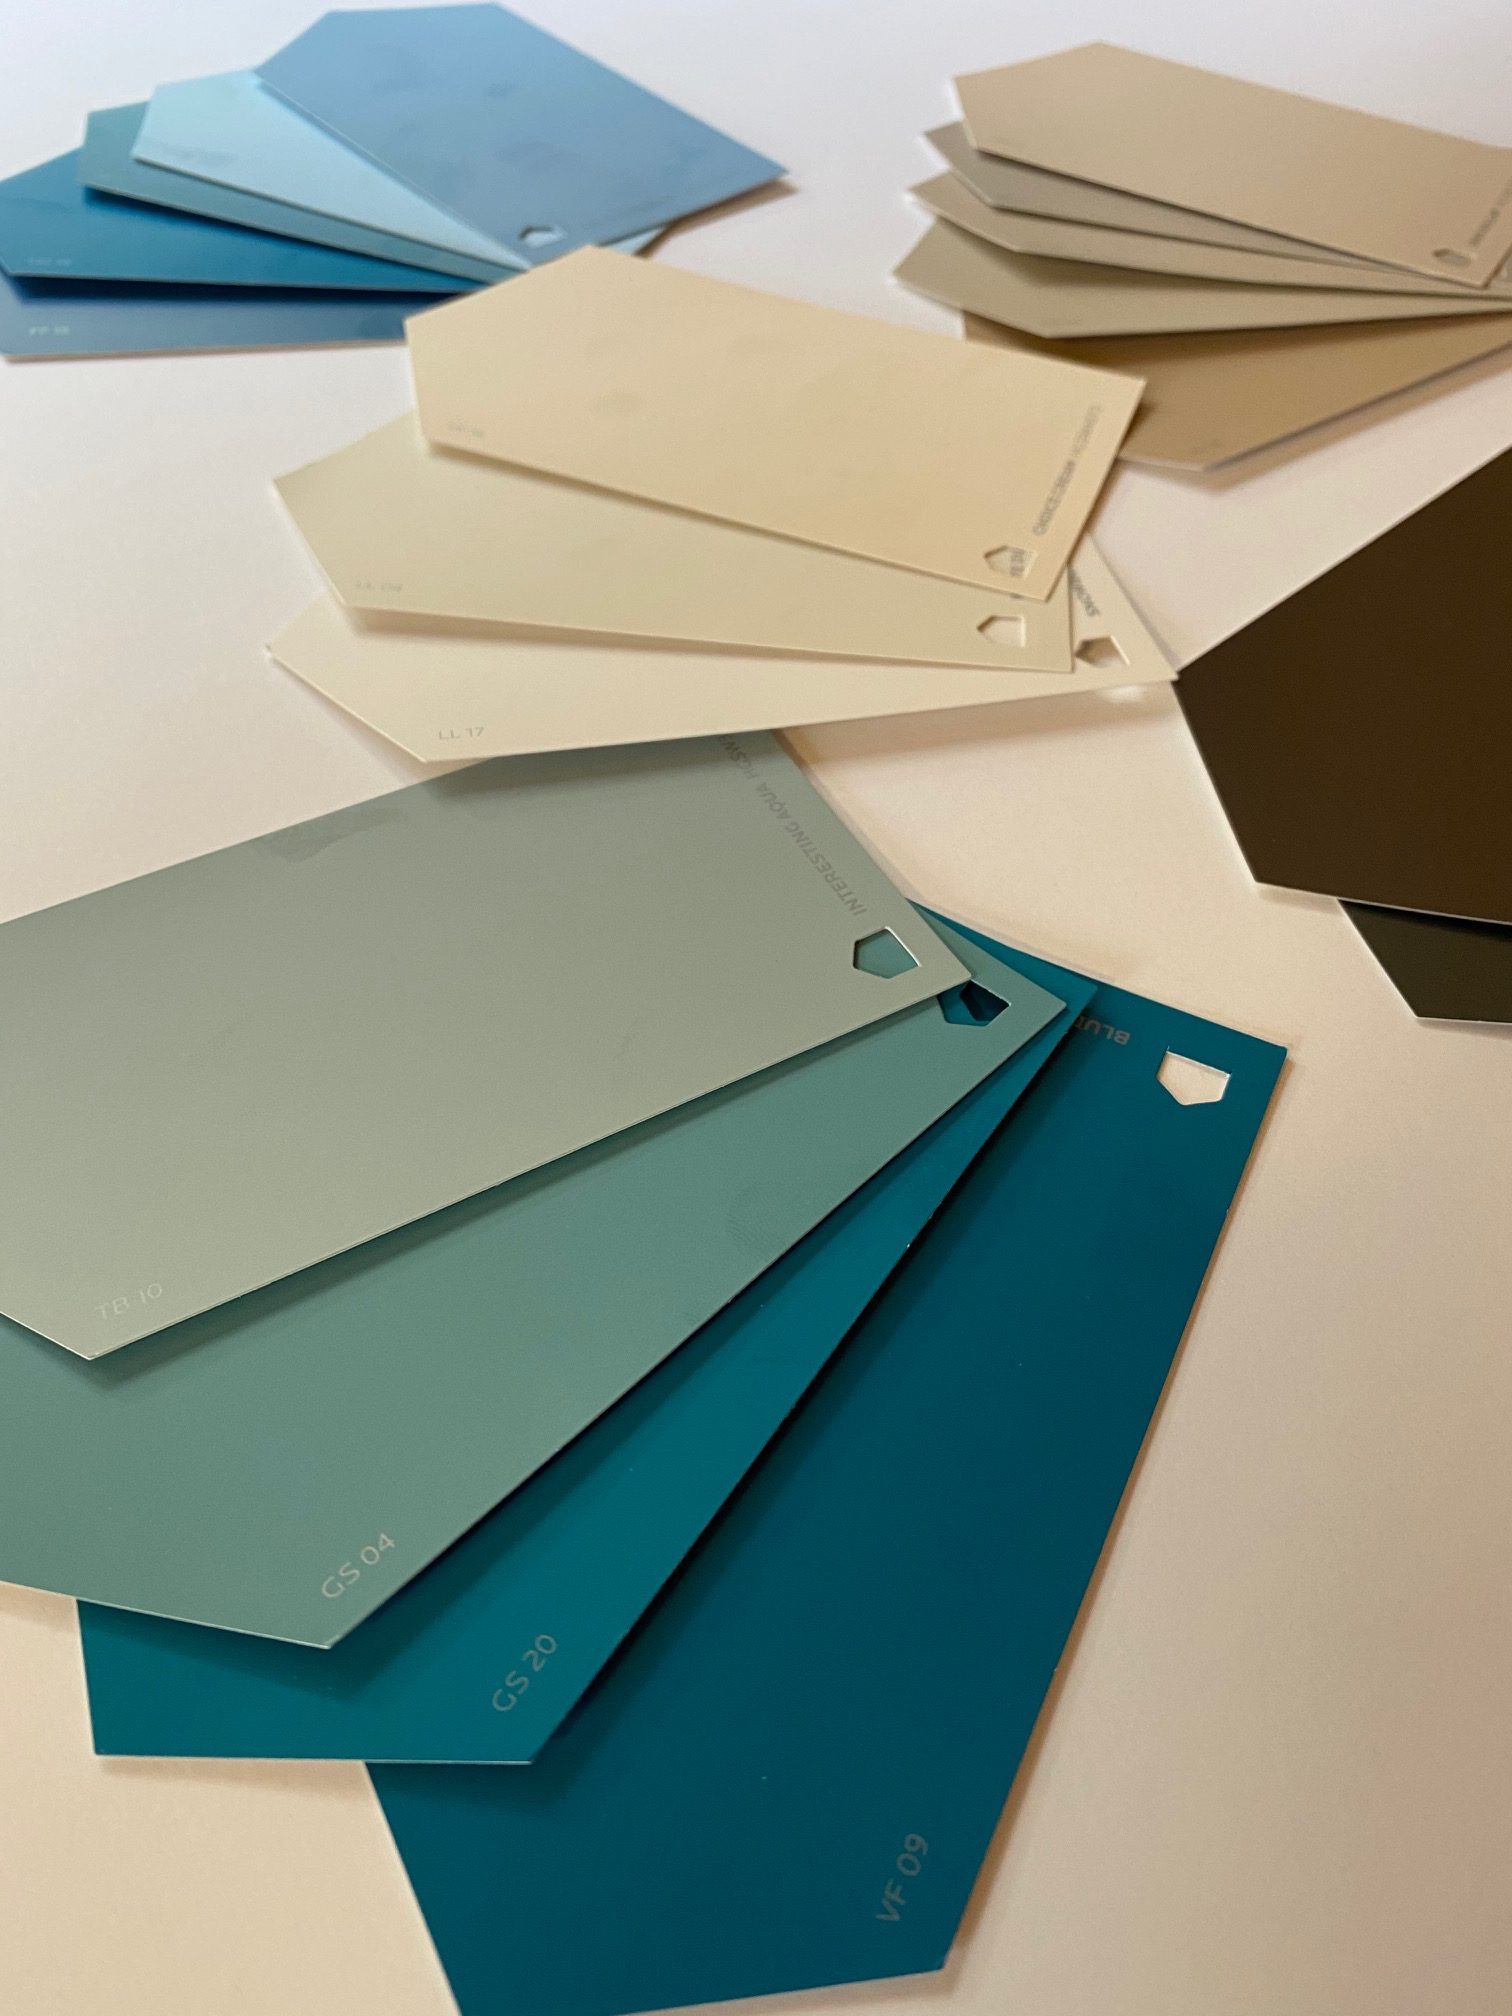 Paint swatches in the colors of teal, cream, charcoal and blue